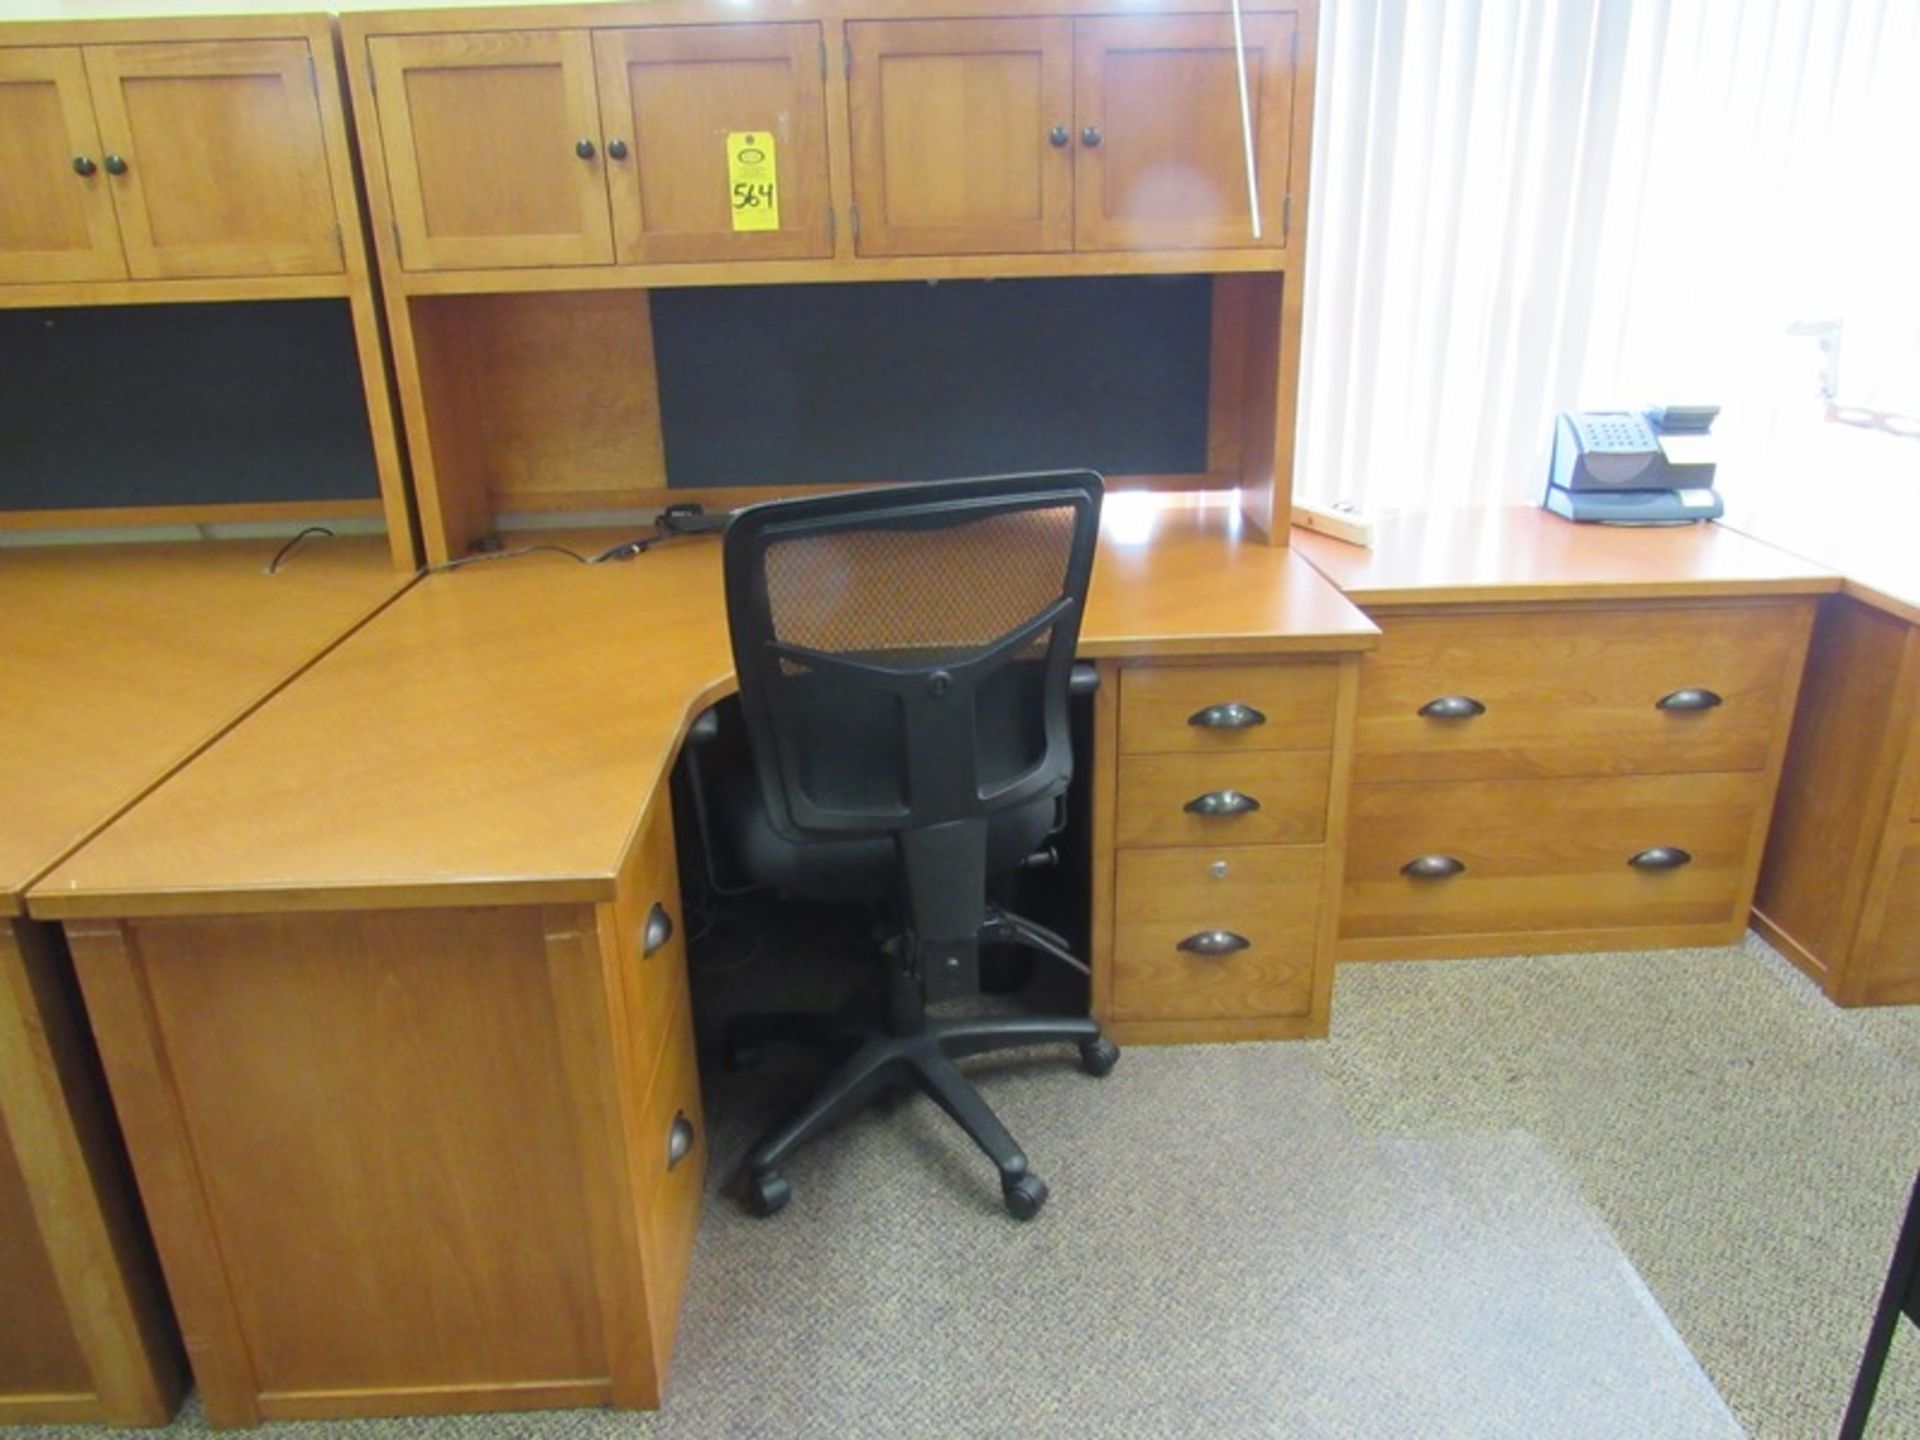 Lot Desk, Chair, Side Board, File Cabinet (No Electronics or Tagged Items Included) (Required